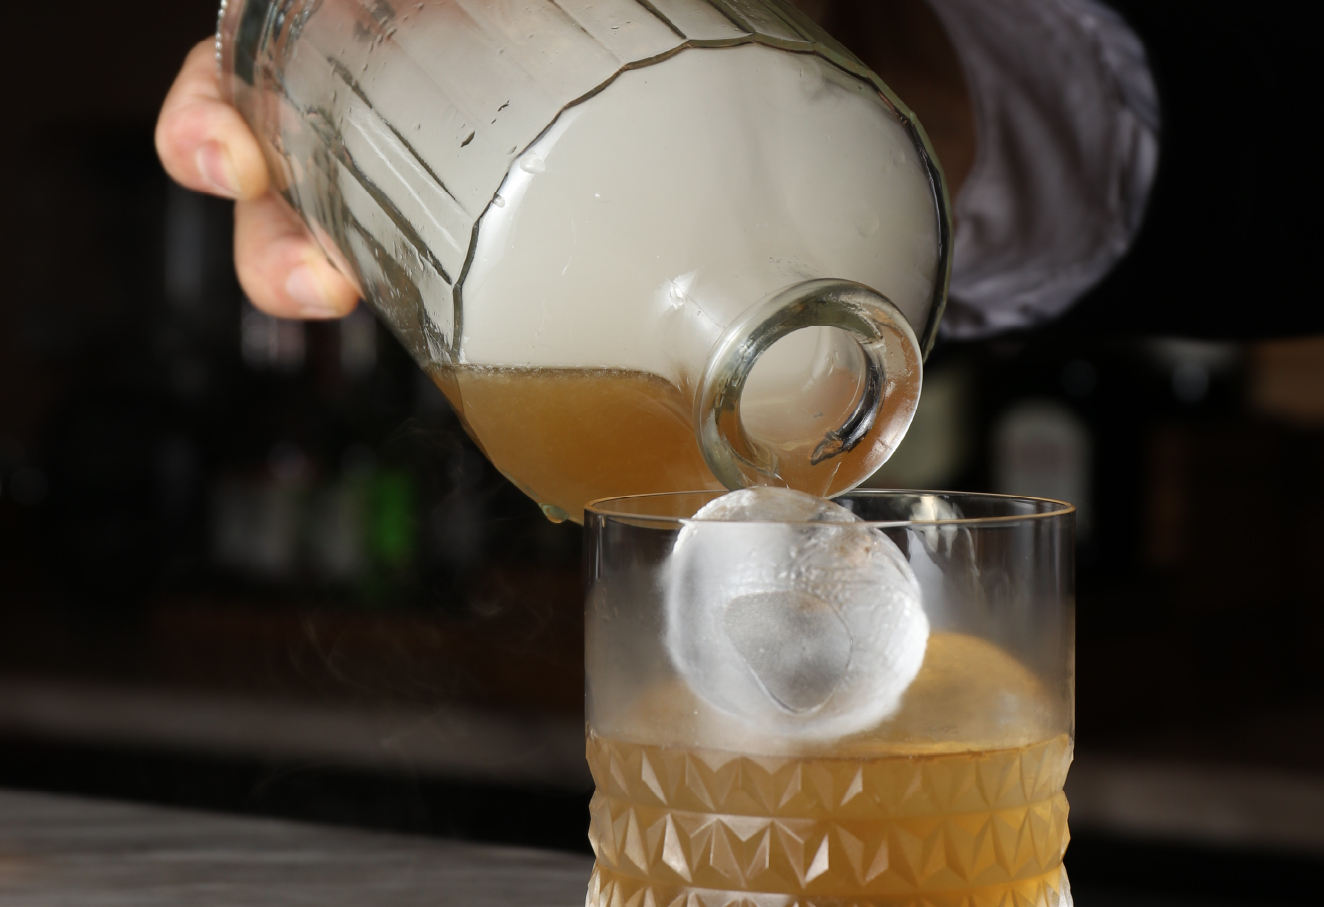 A person is pouring alcoholic drinks in a glass.